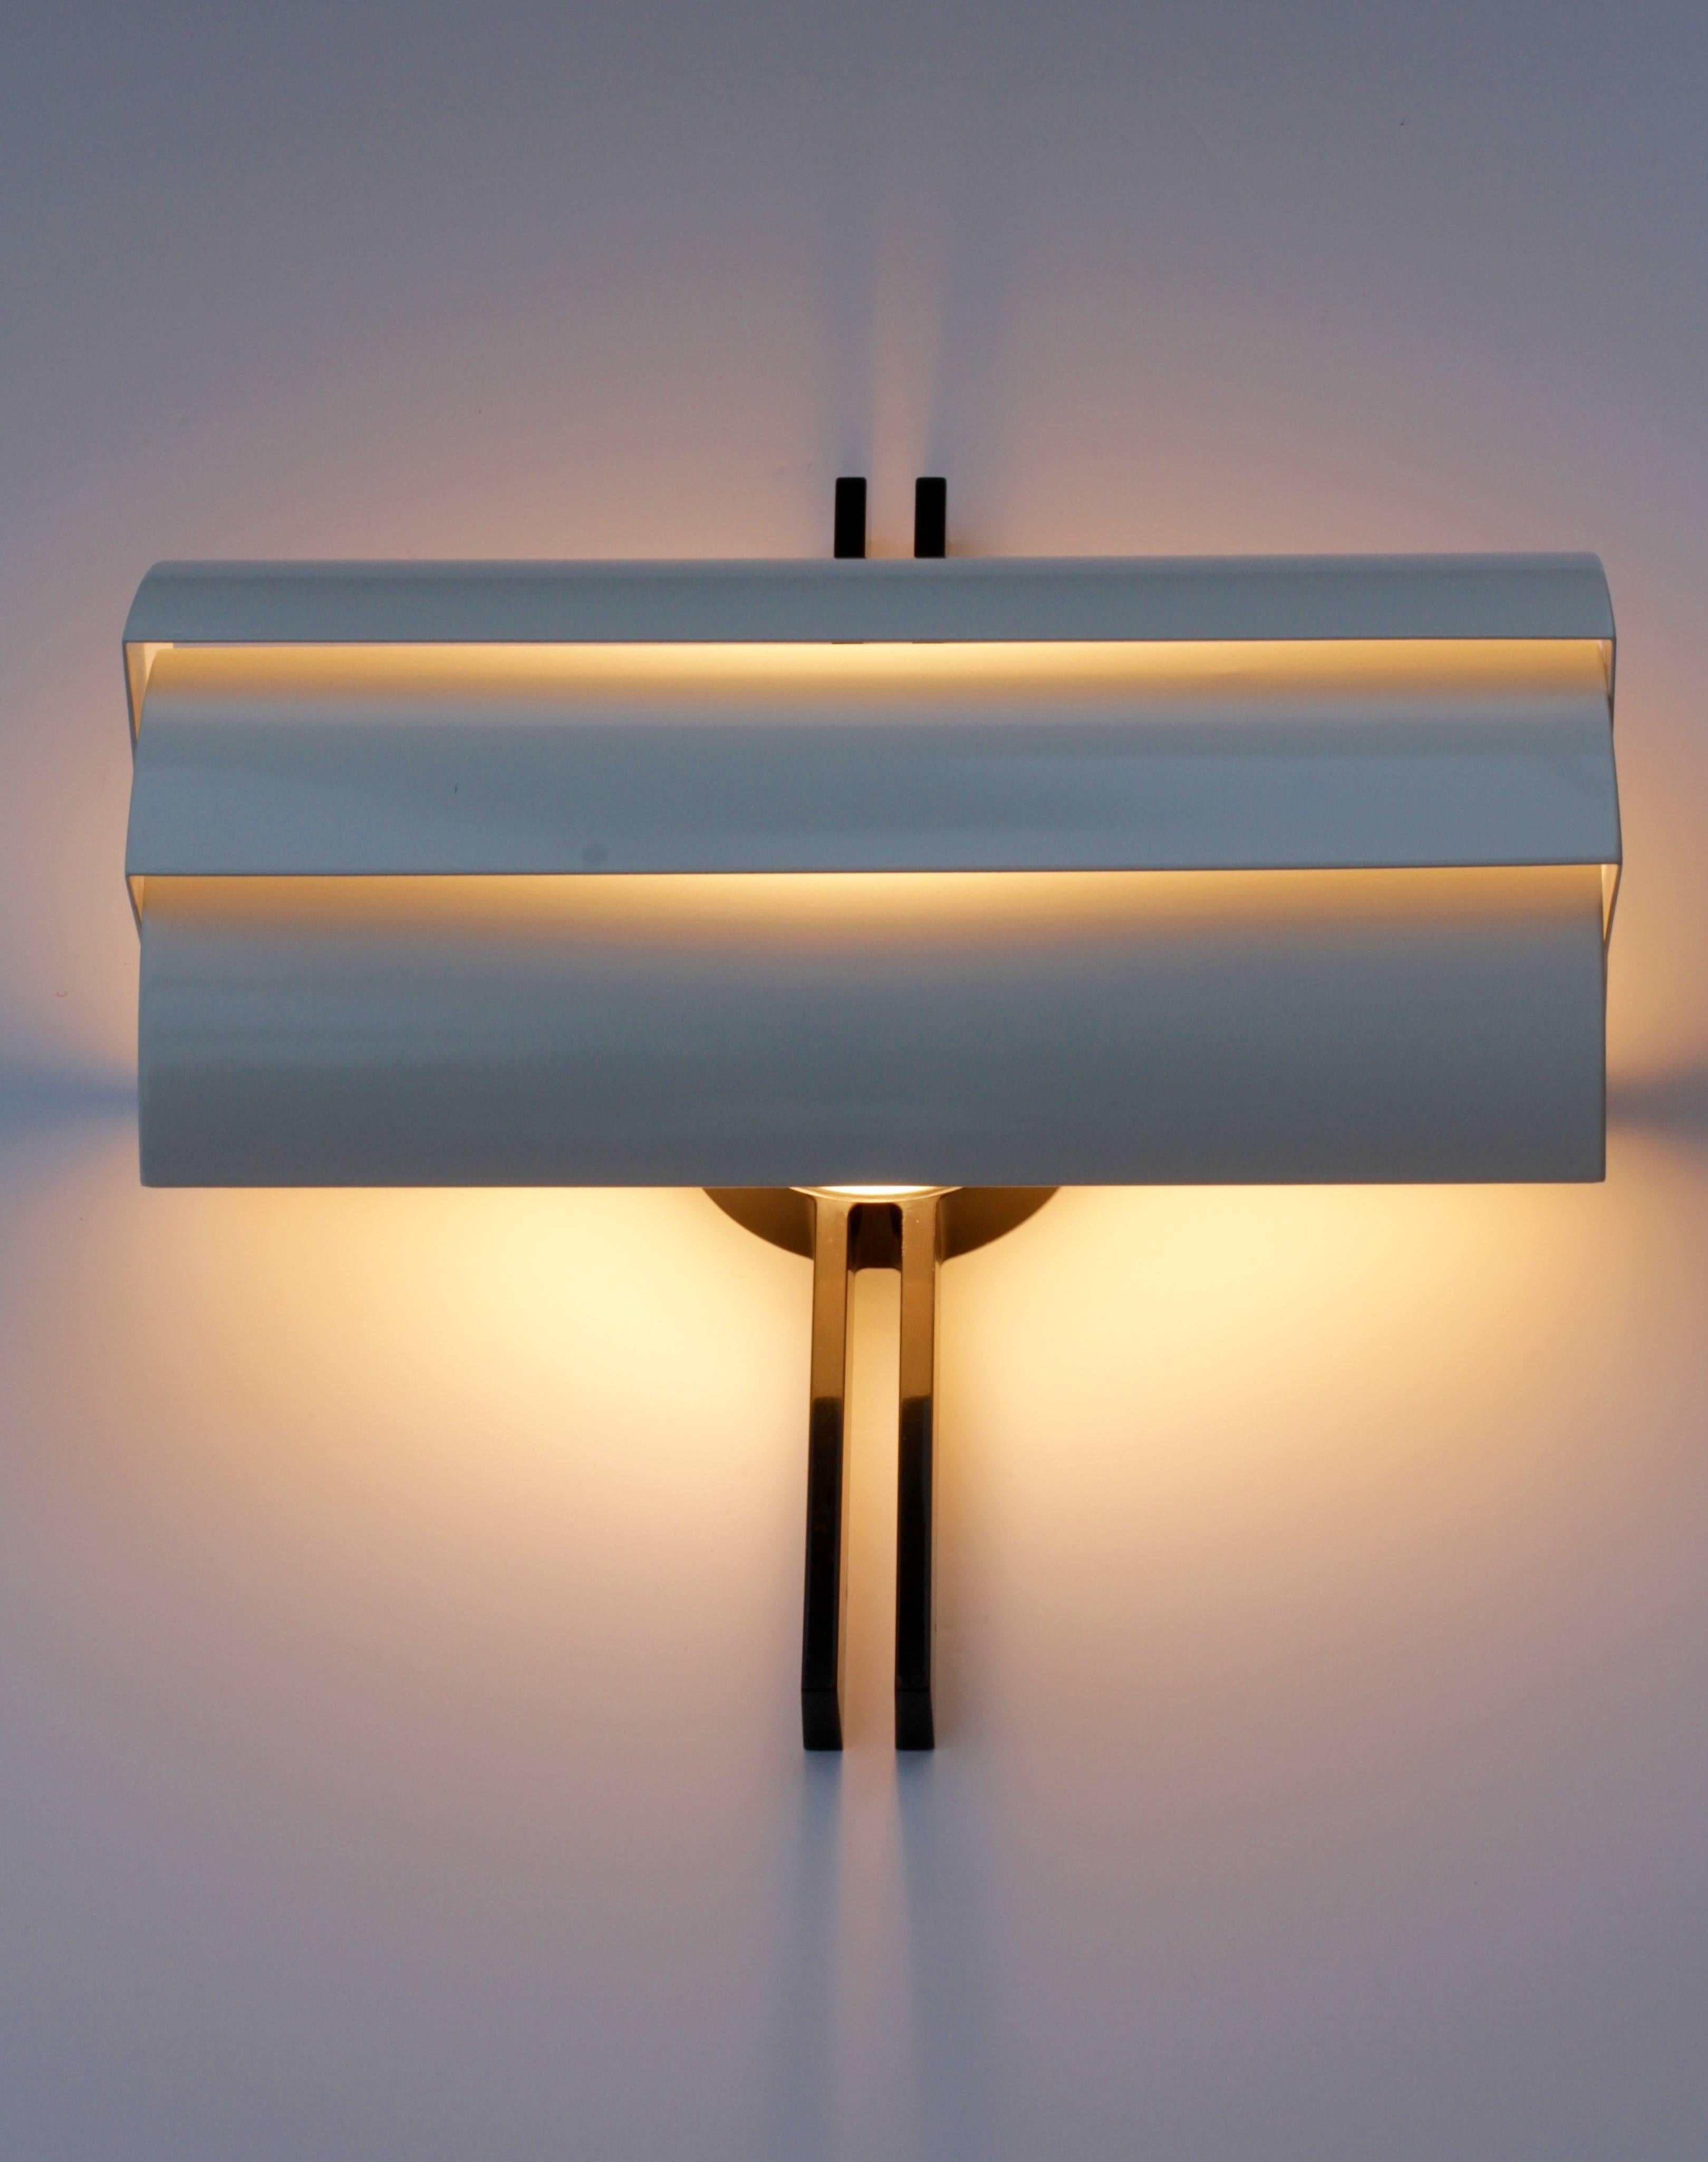 One of a pair of stunning and large wall-mounted lights, lamps or sconces designed for Artemide by Ernesto Gismondi, circa 1980s. Featuring three independently adjustable white metal shades giving you the ability to direct the light wherever you see